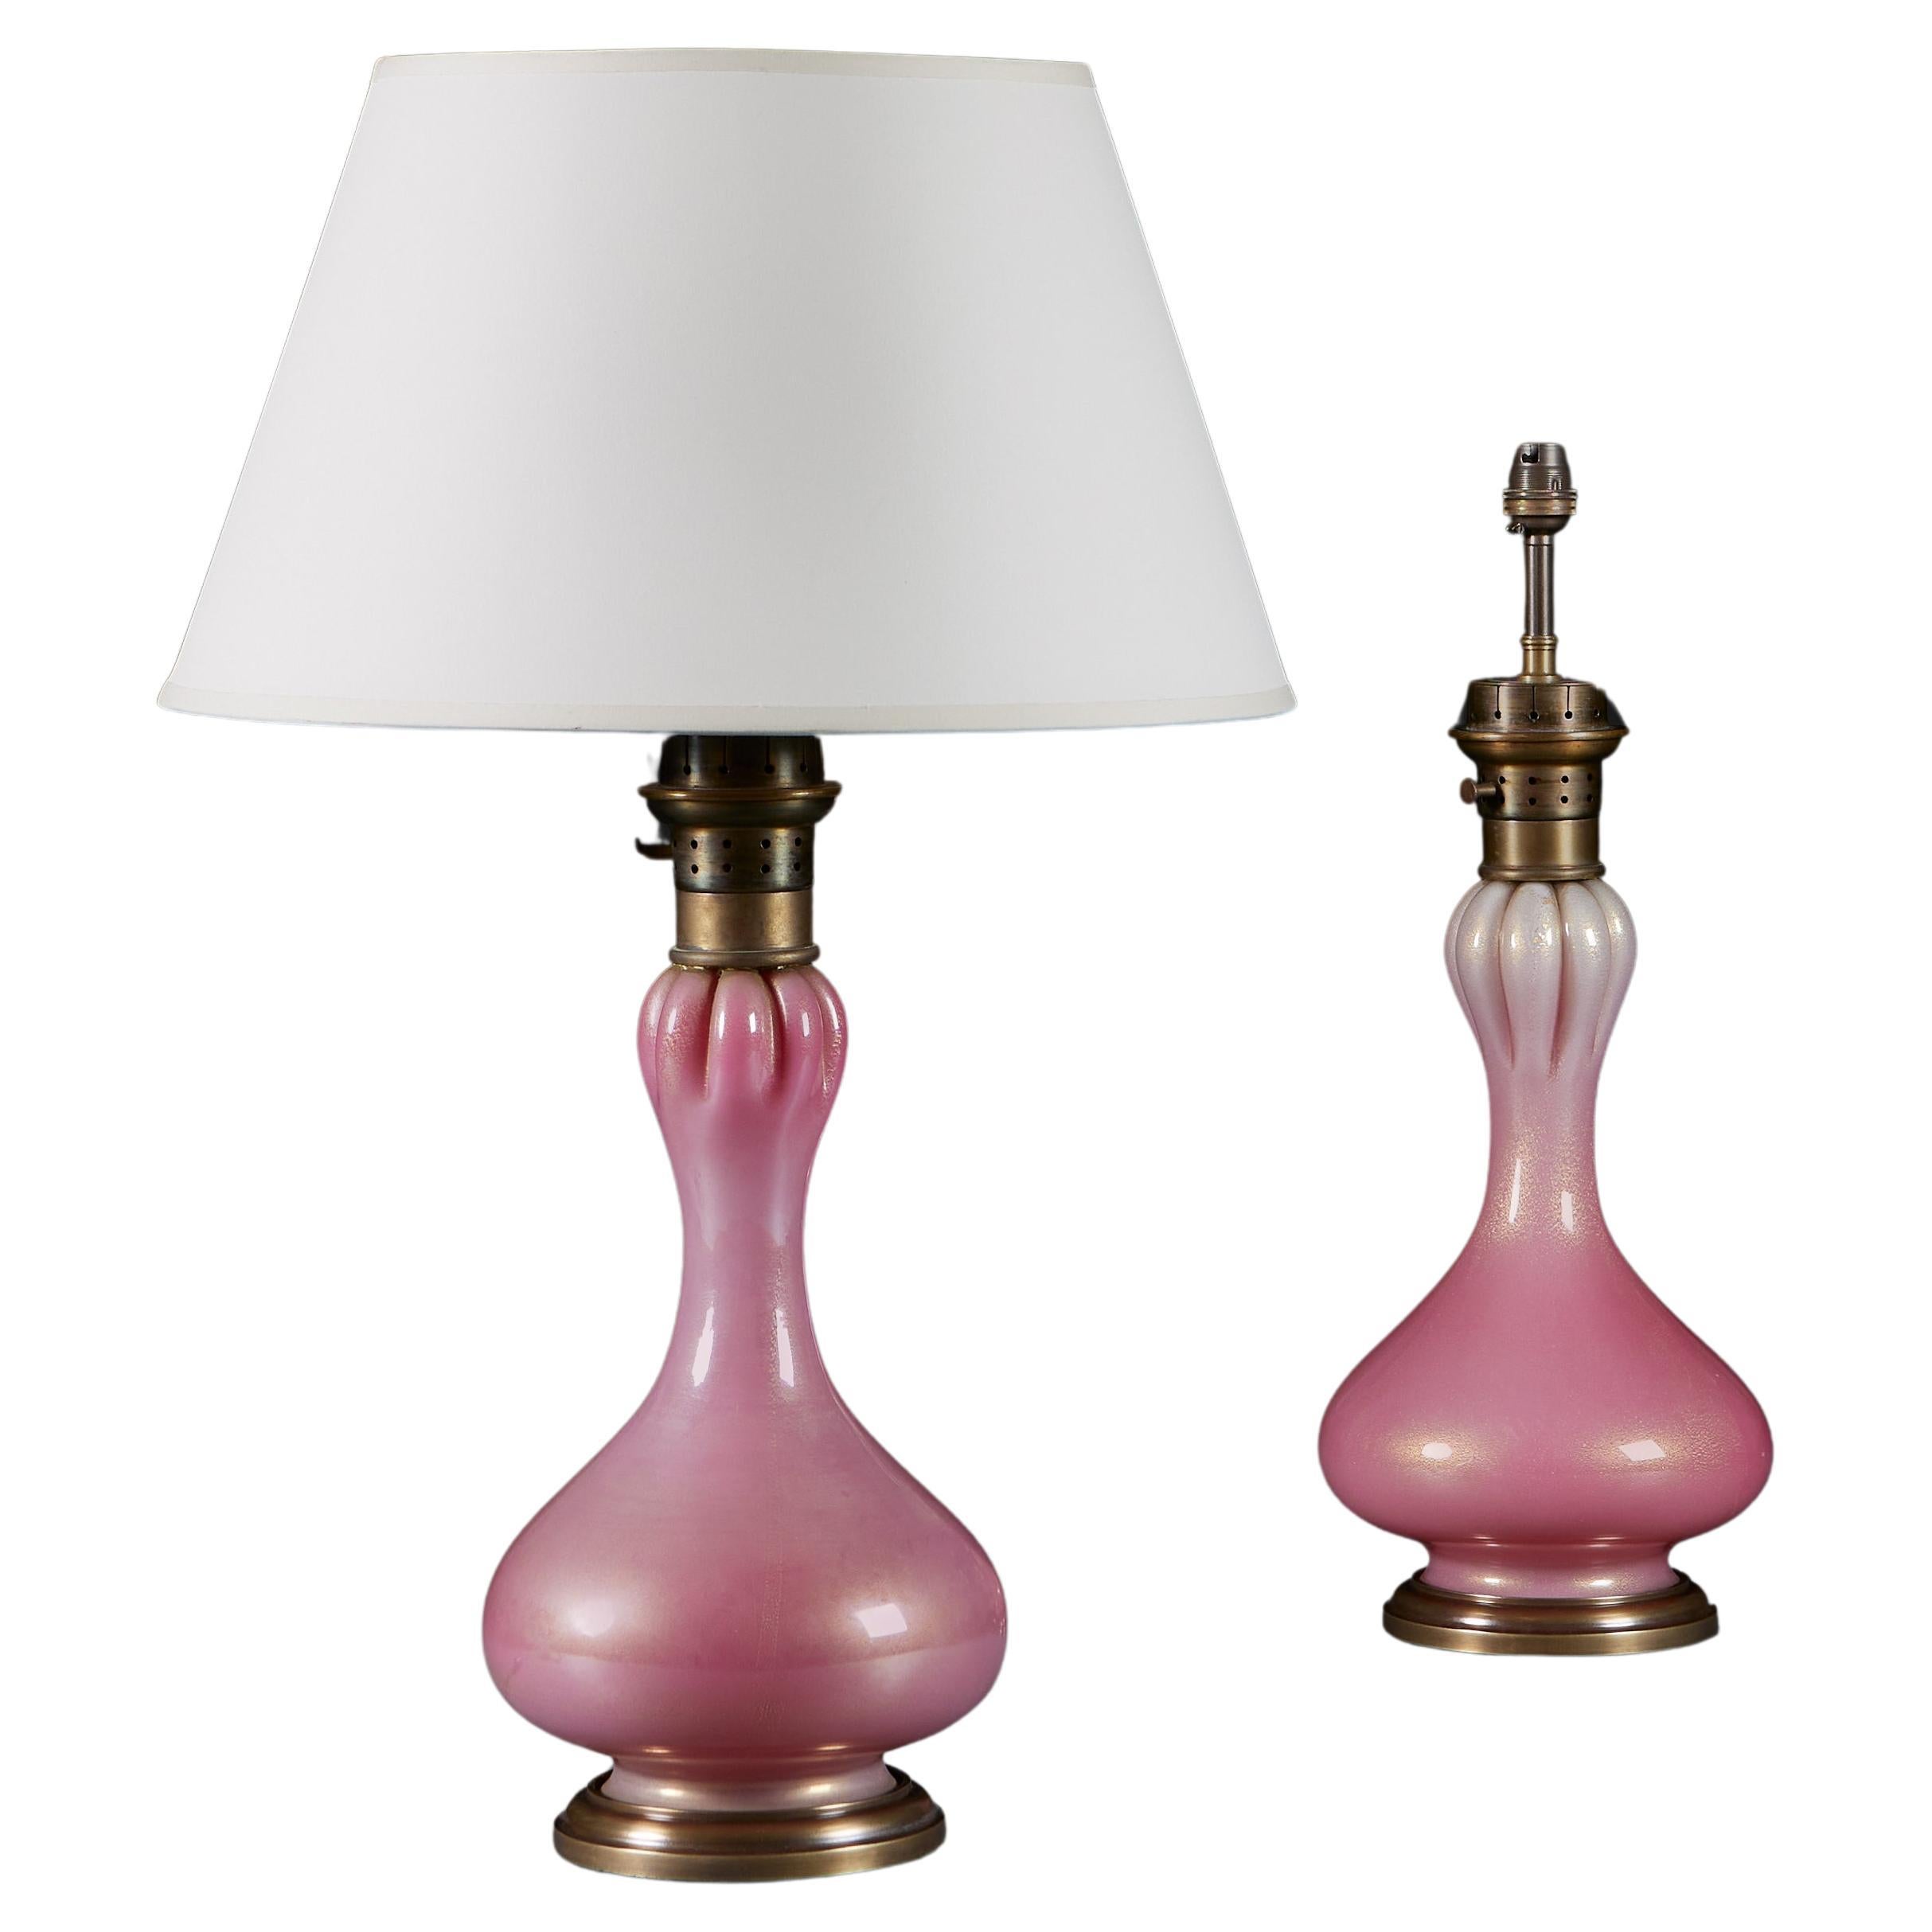 A Pair of Pink Murano Glass Lamps by Seguso  For Sale